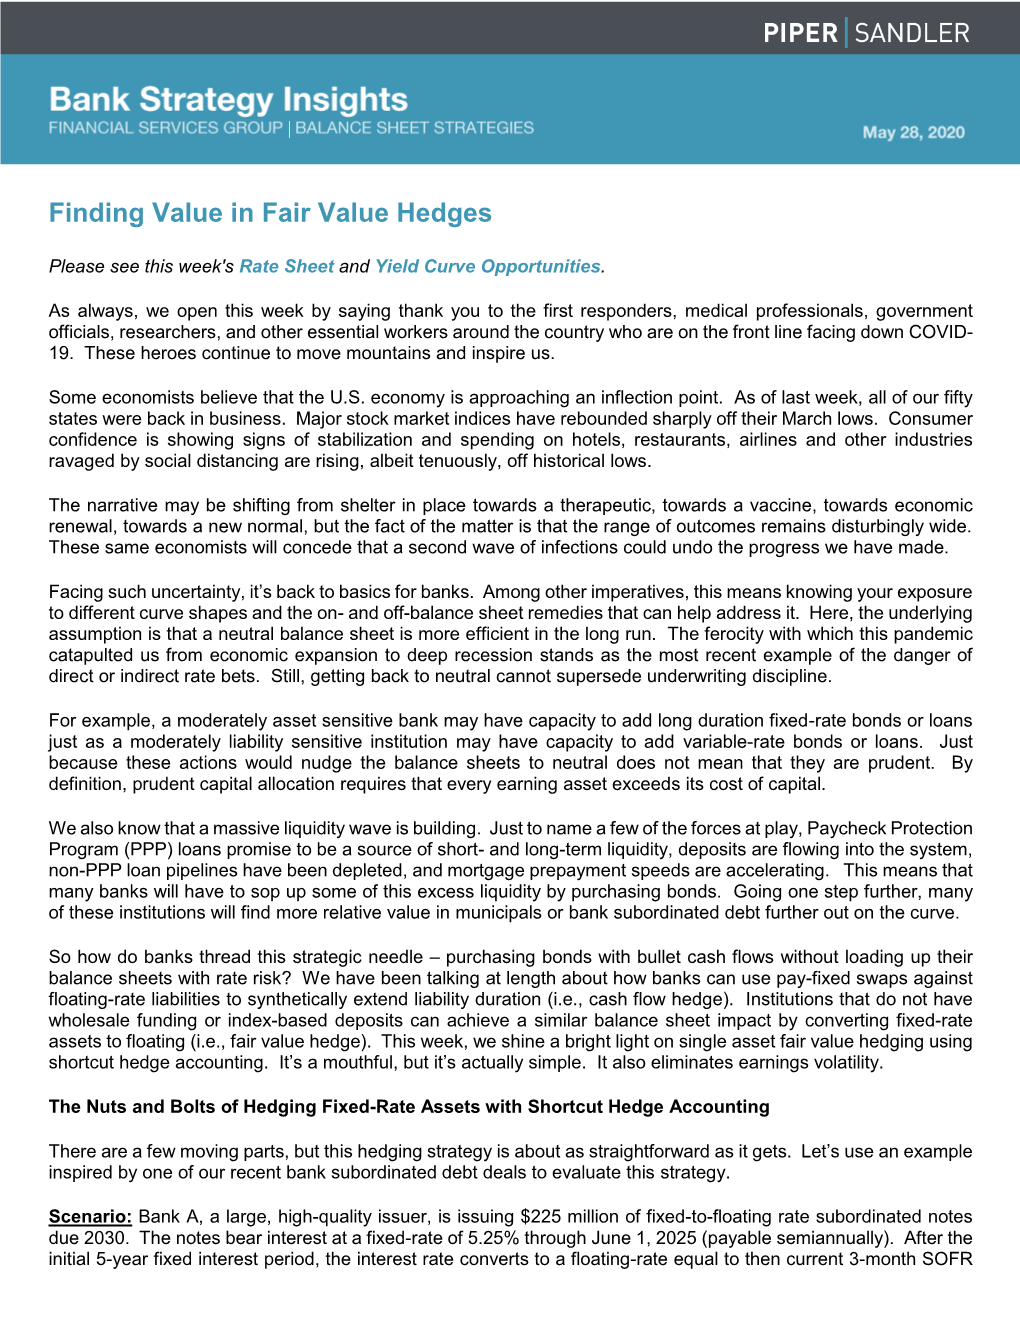 Finding Value in Fair Value Hedges